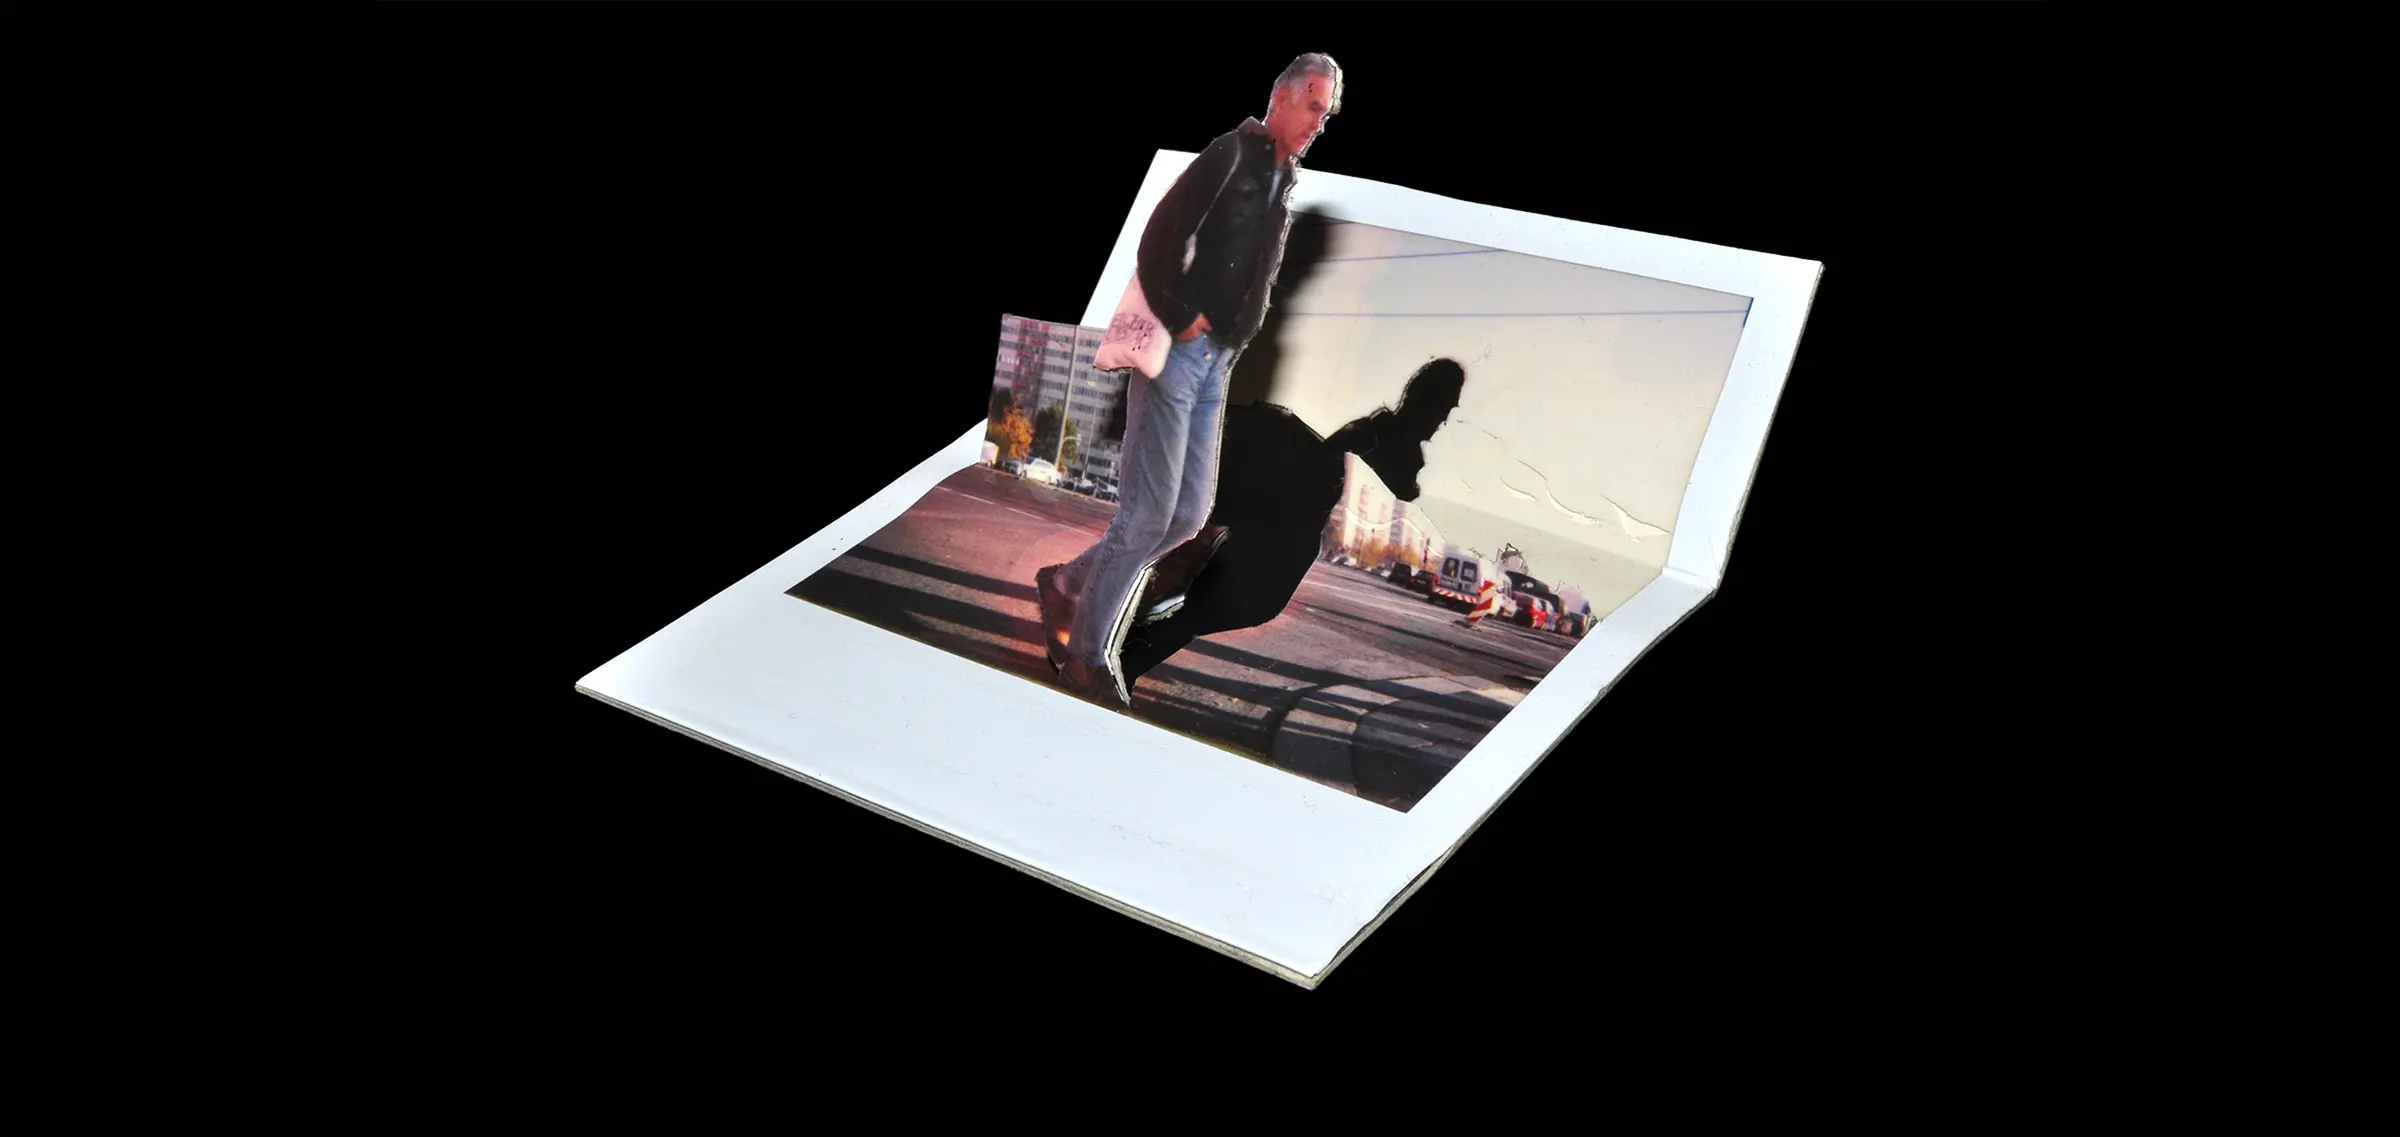 Person standing next to a crossing and cut along their contour out of the Polaroid image.